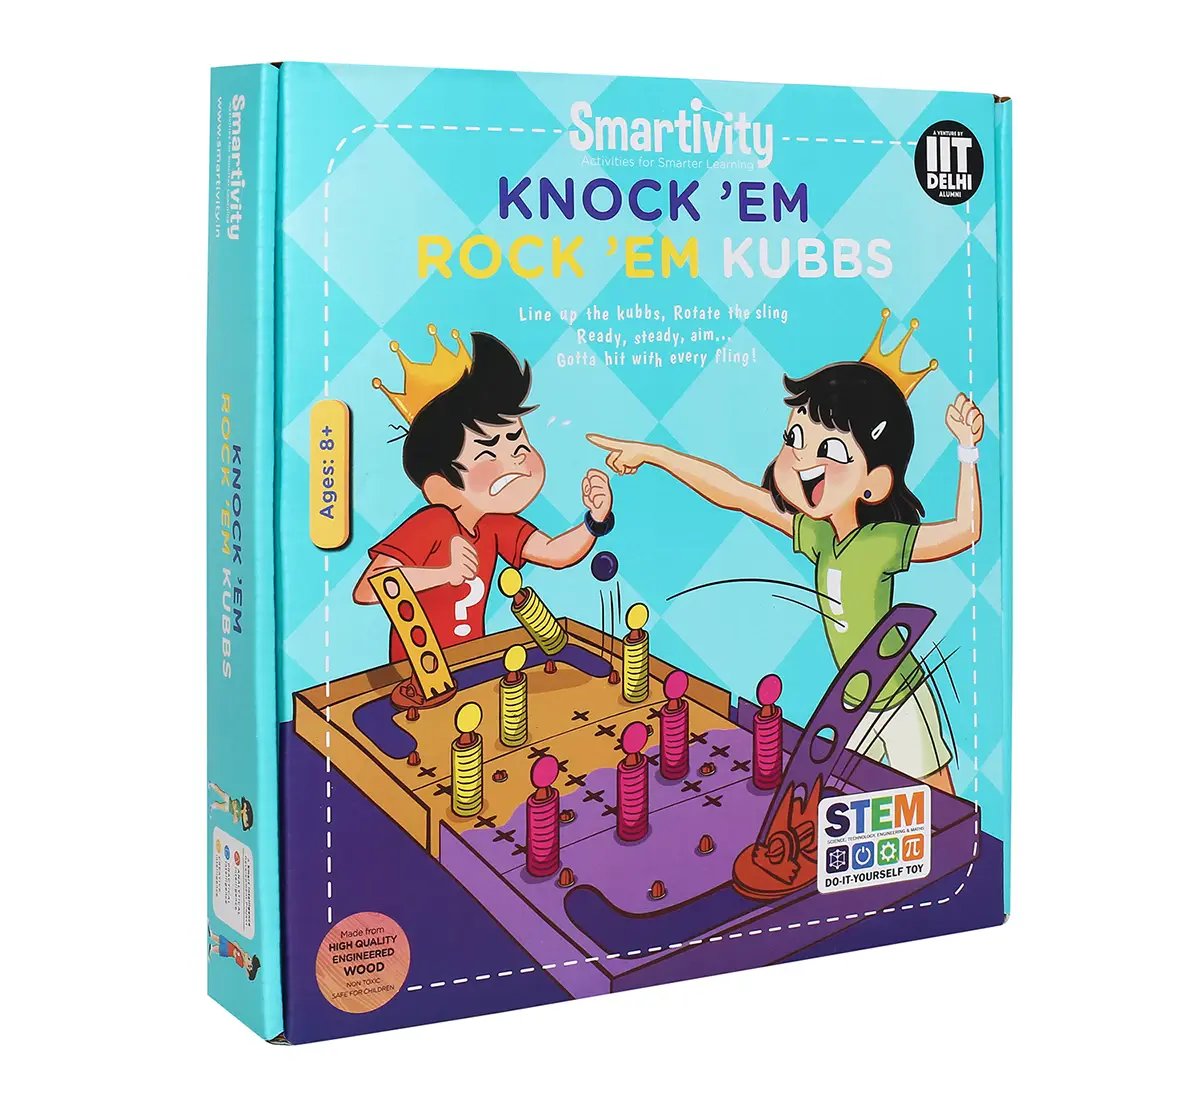 Smartivity Knock 'Em Rock 'Em Kubbs : Stem, Learning, Educational and Construction Activity Toy Gift for age 8Y+  (Multi-Color)